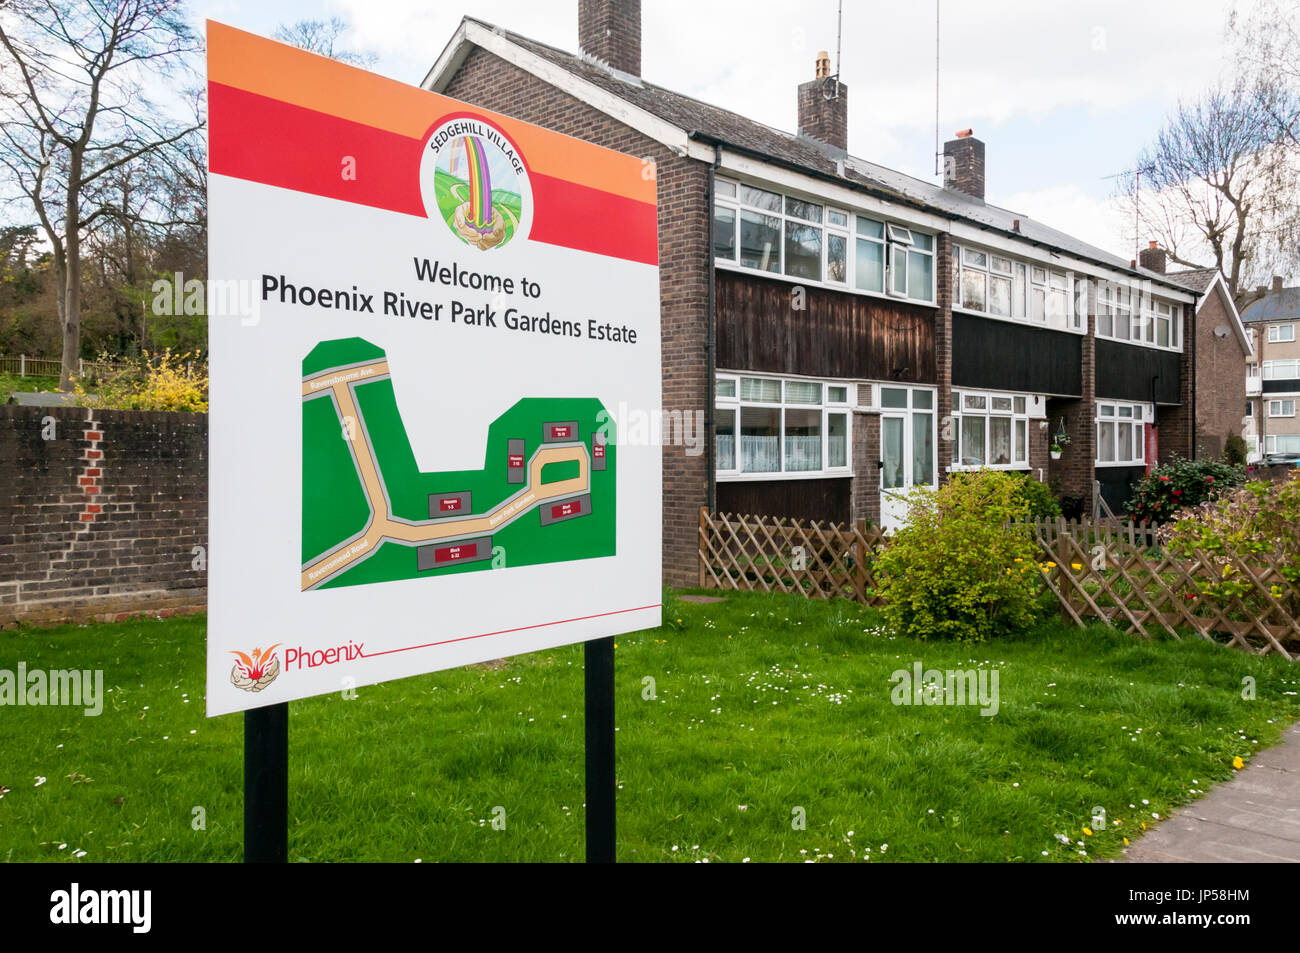 A sign for Phoenix River Park Gardens Estate in South London Stock Photo